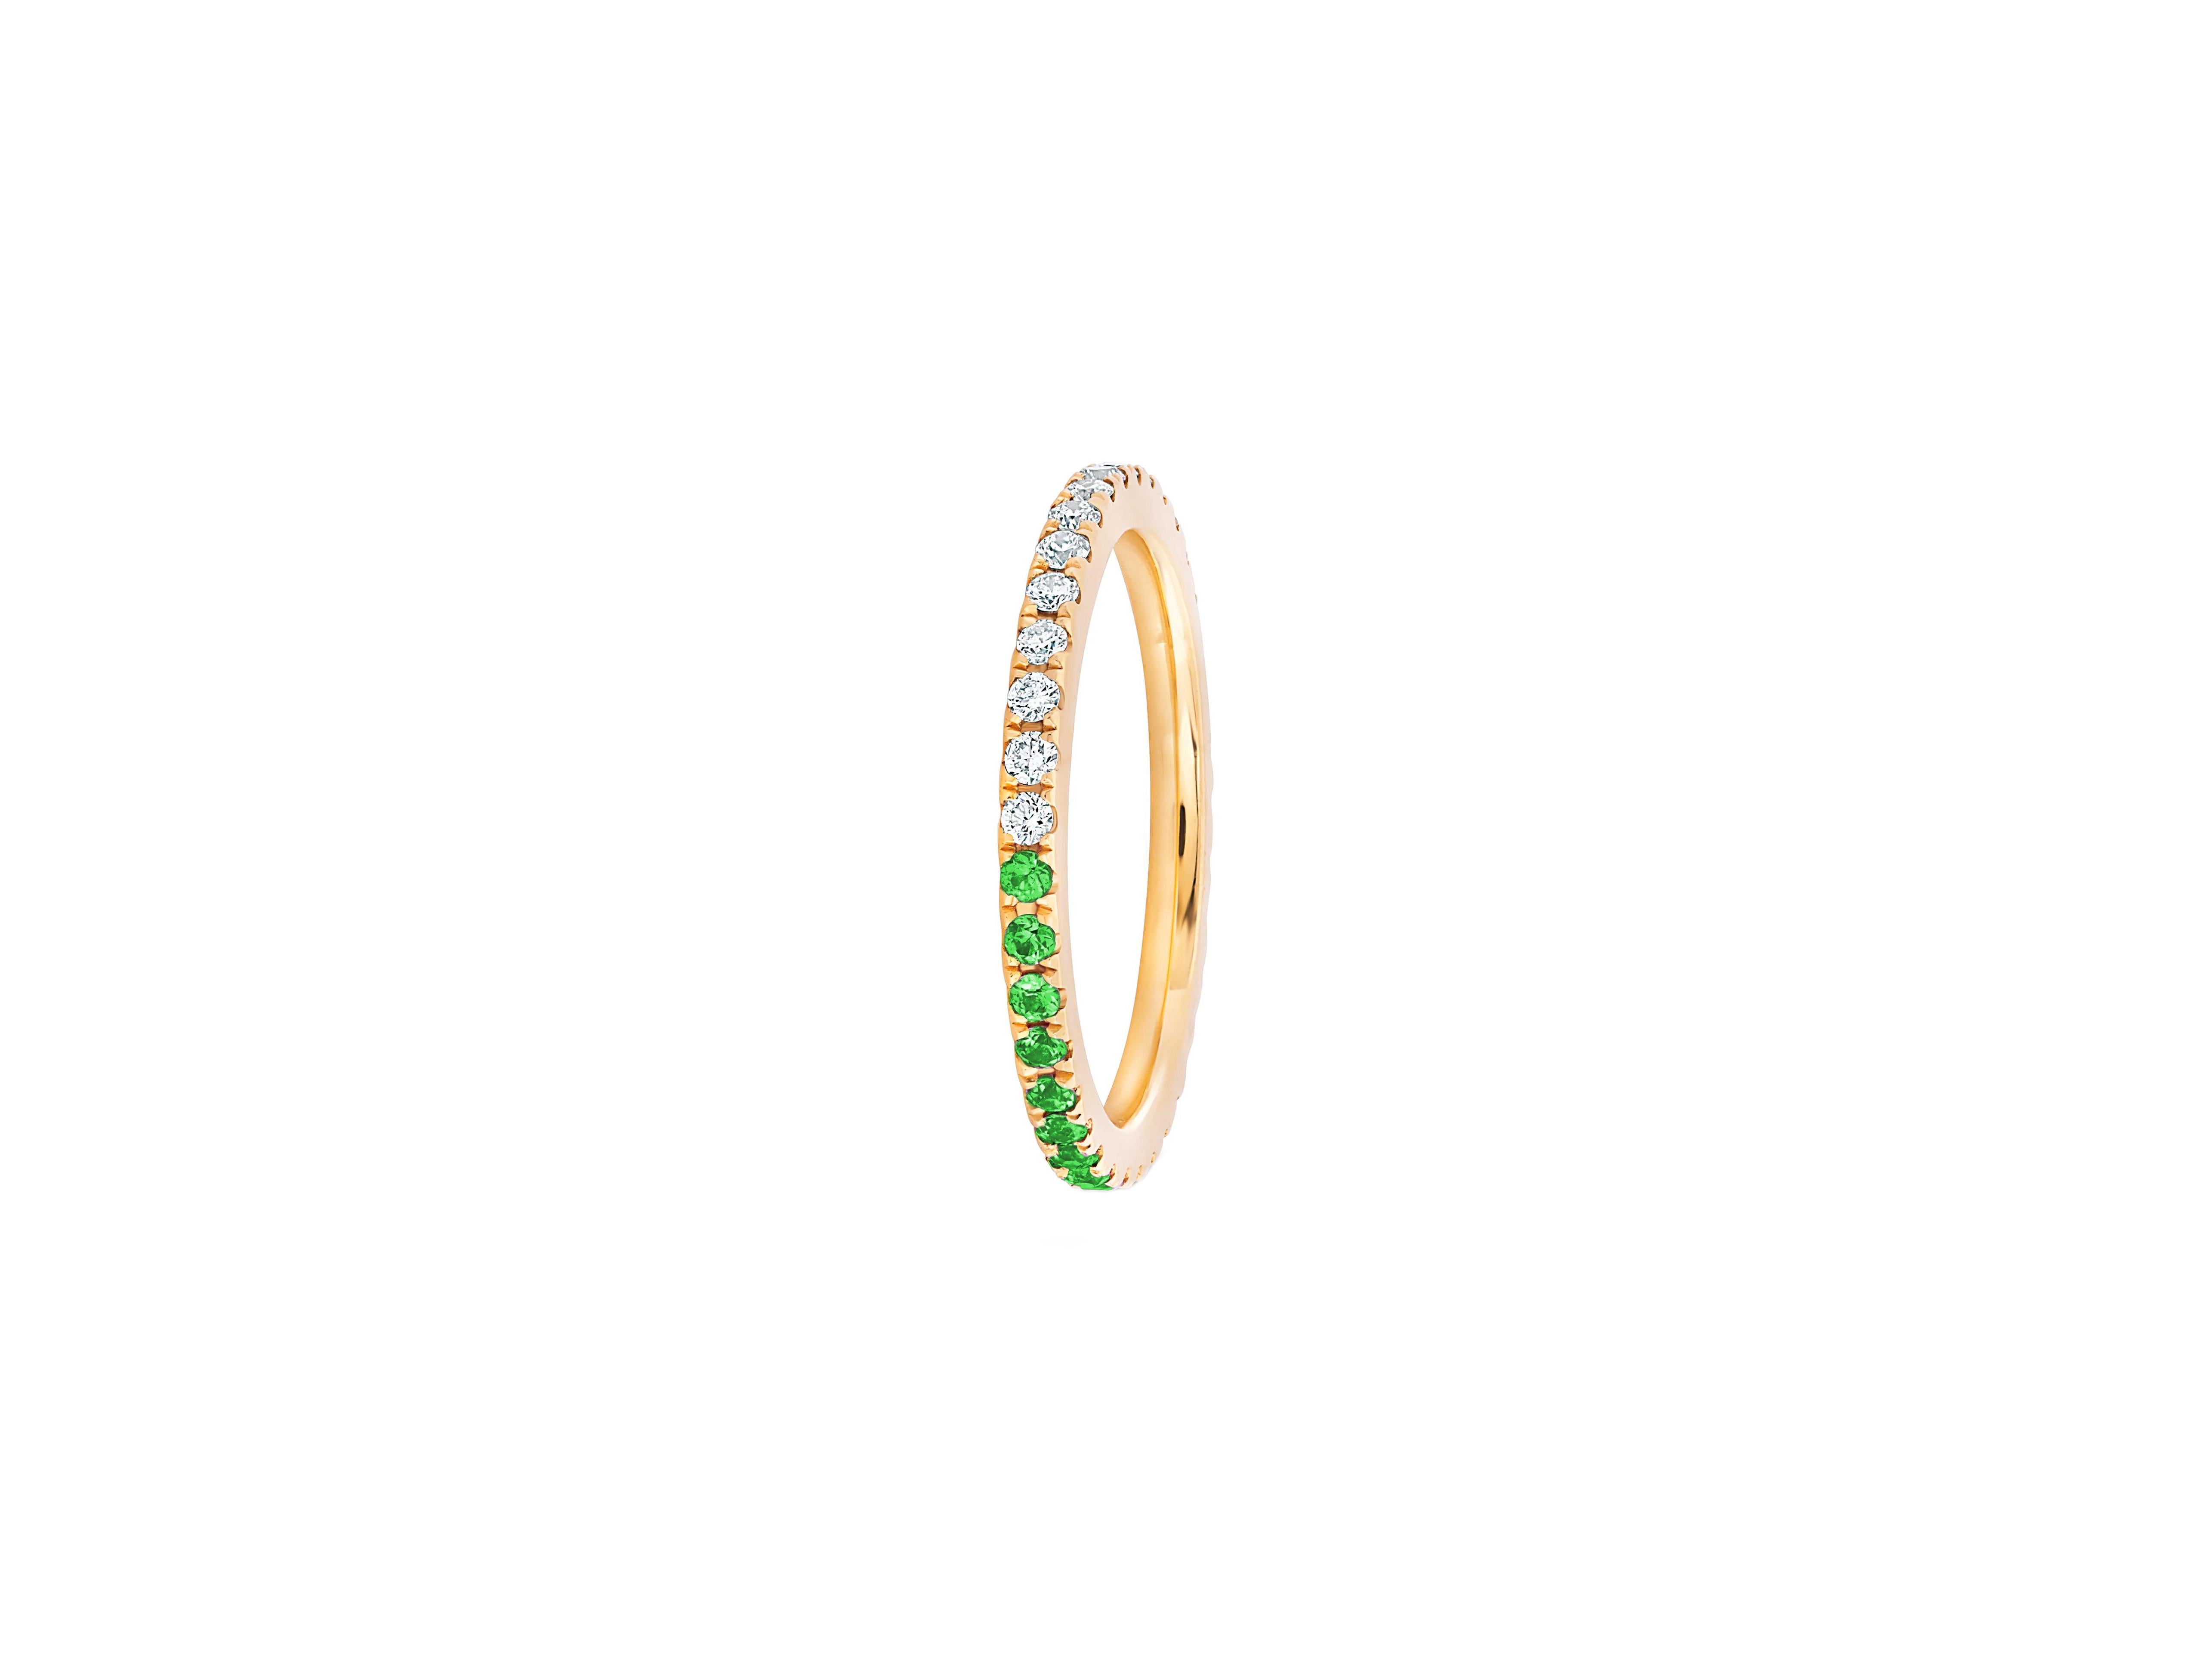 Full eternity moissanite, lab sapphire 14k gold  band.
Ombre Pink Lab Emerald and Moissanite 14k gold Eternity Band. Mix color eternity 14k gold ring band. Two side wearable eternity ring.

Metal: 14k gold
Weight: 2 gr depends from